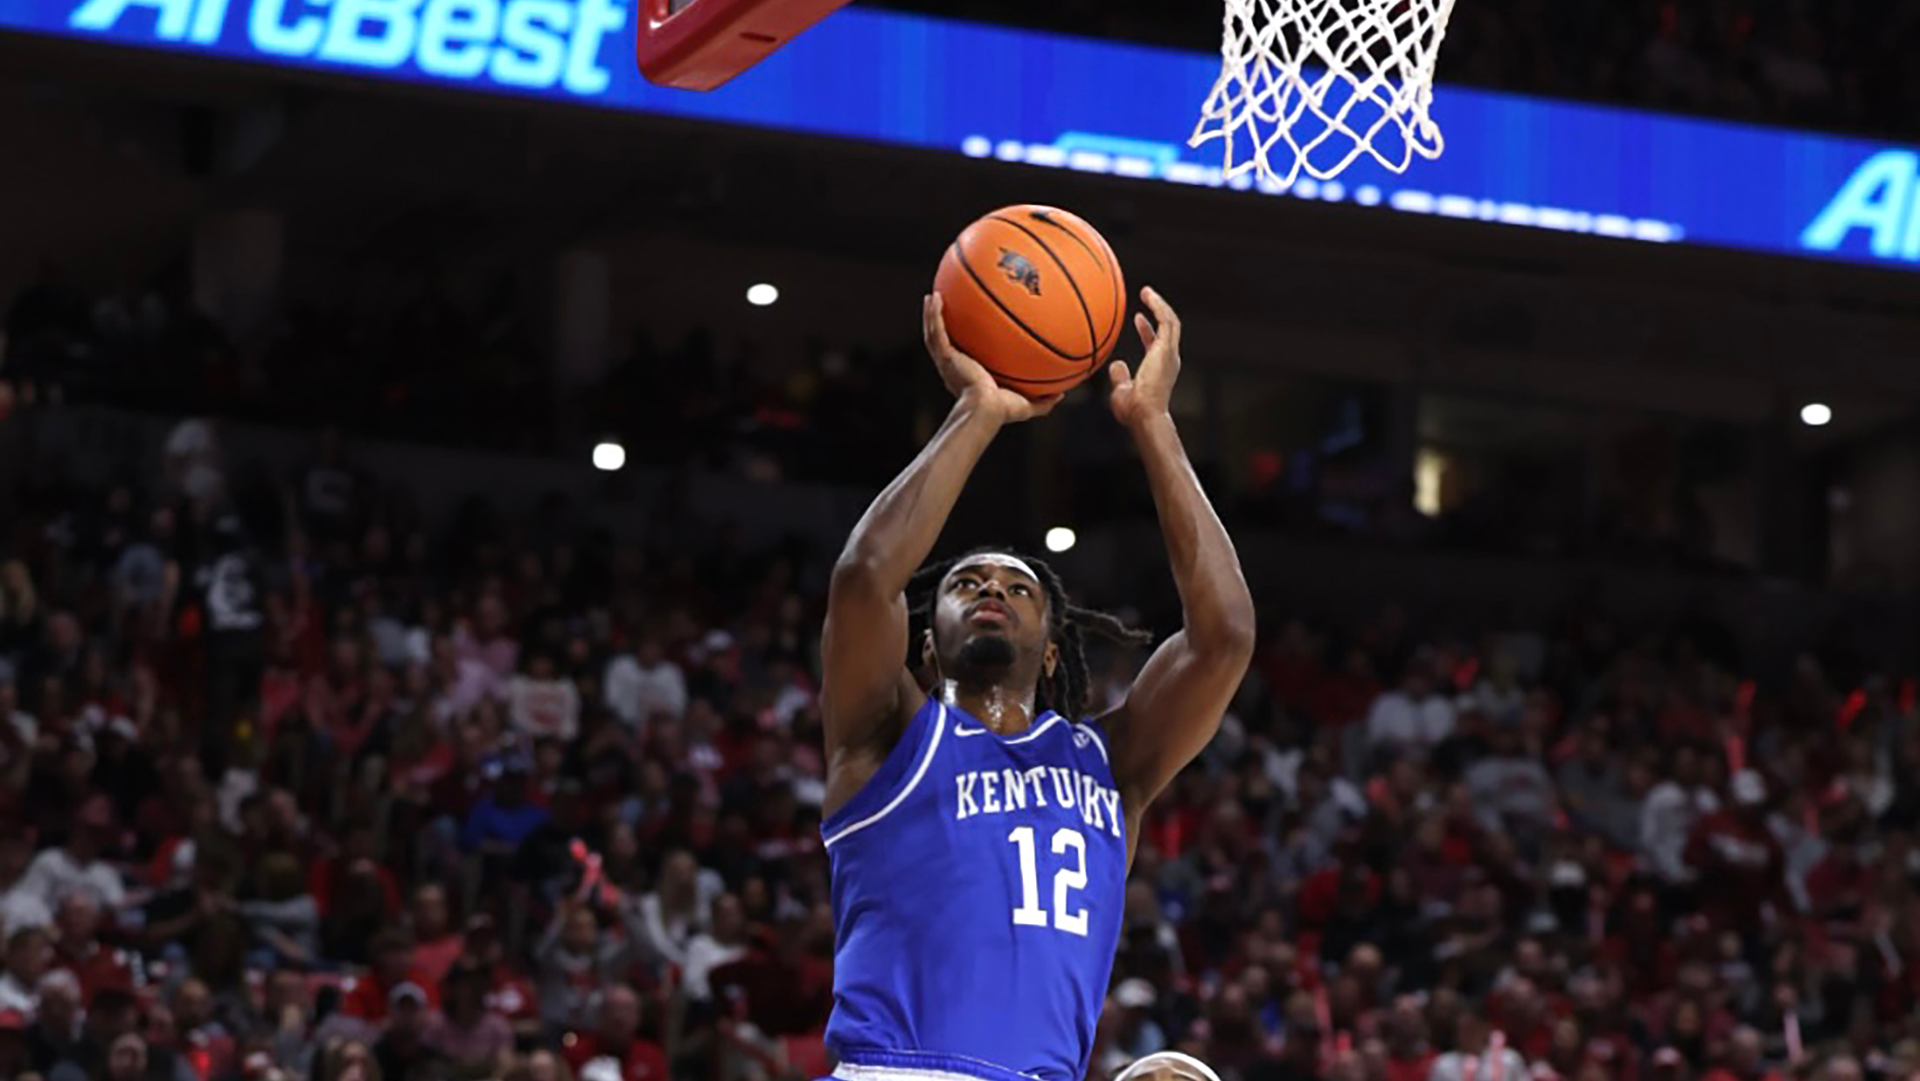 Reeves Leads No. 6 Kentucky Past Arkansas on Saturday